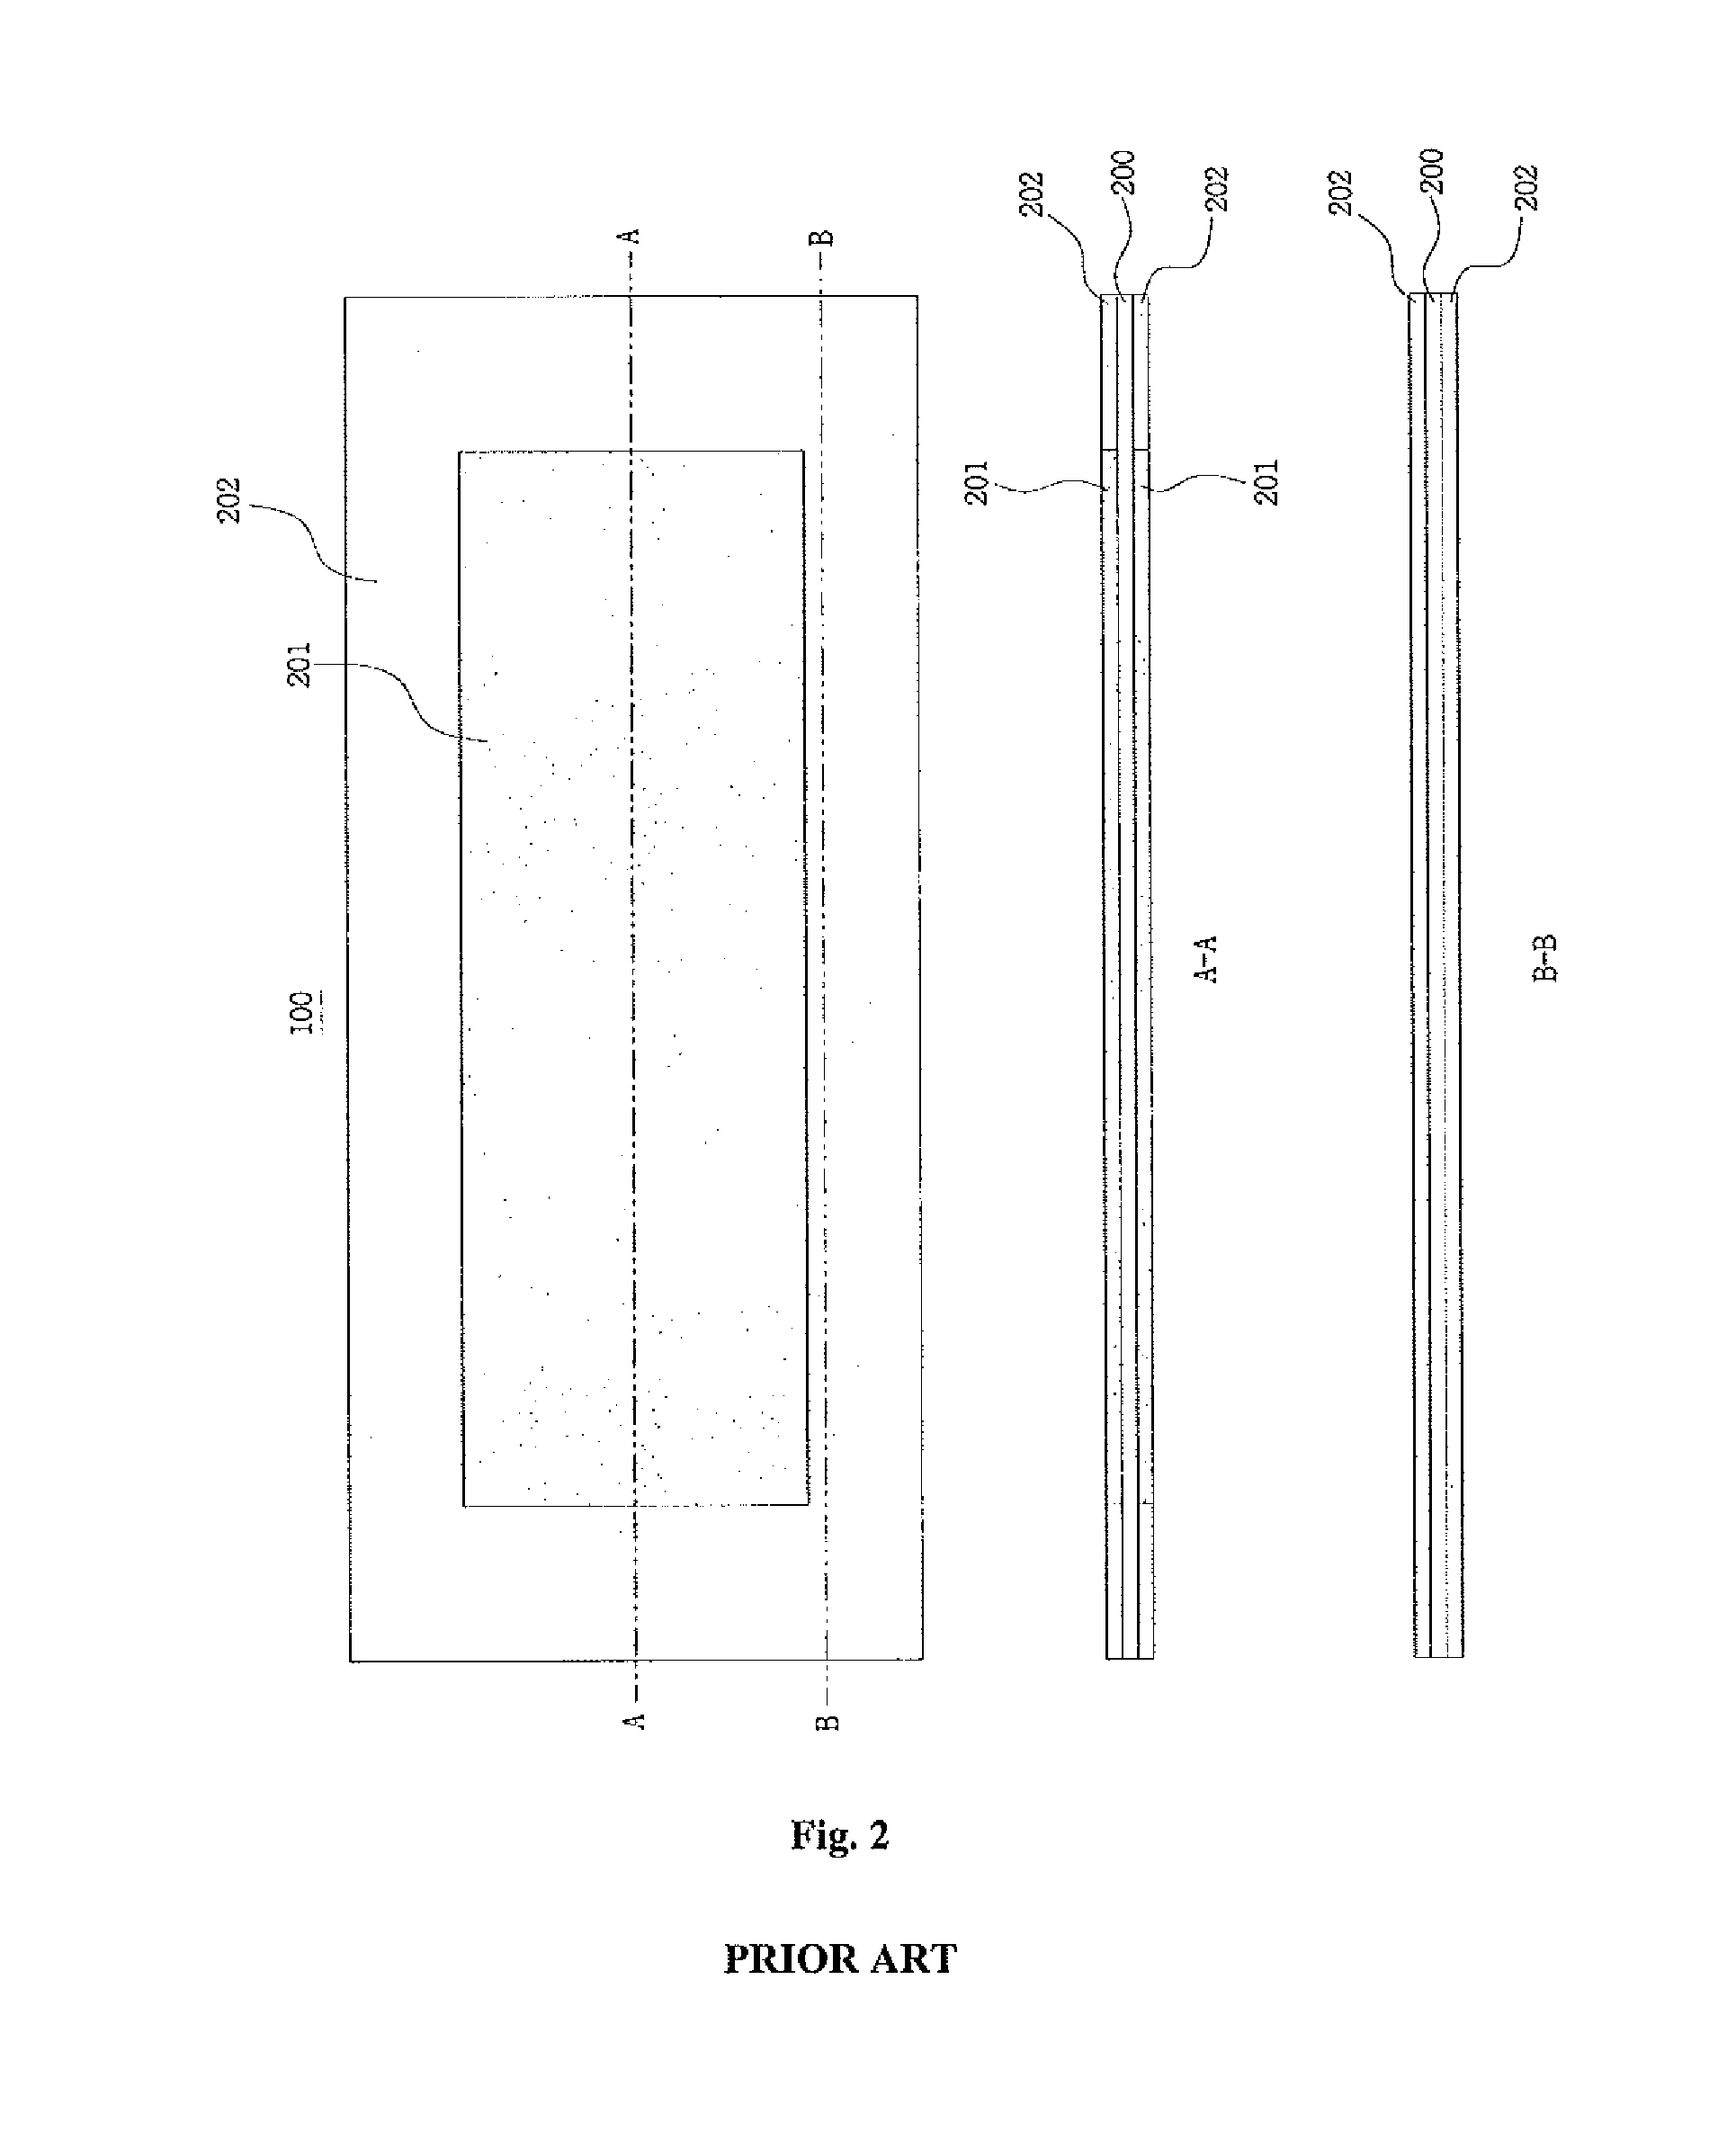 Membrane electrode assembly containing flexible printed circuit board formed on ion exchange membrane support film